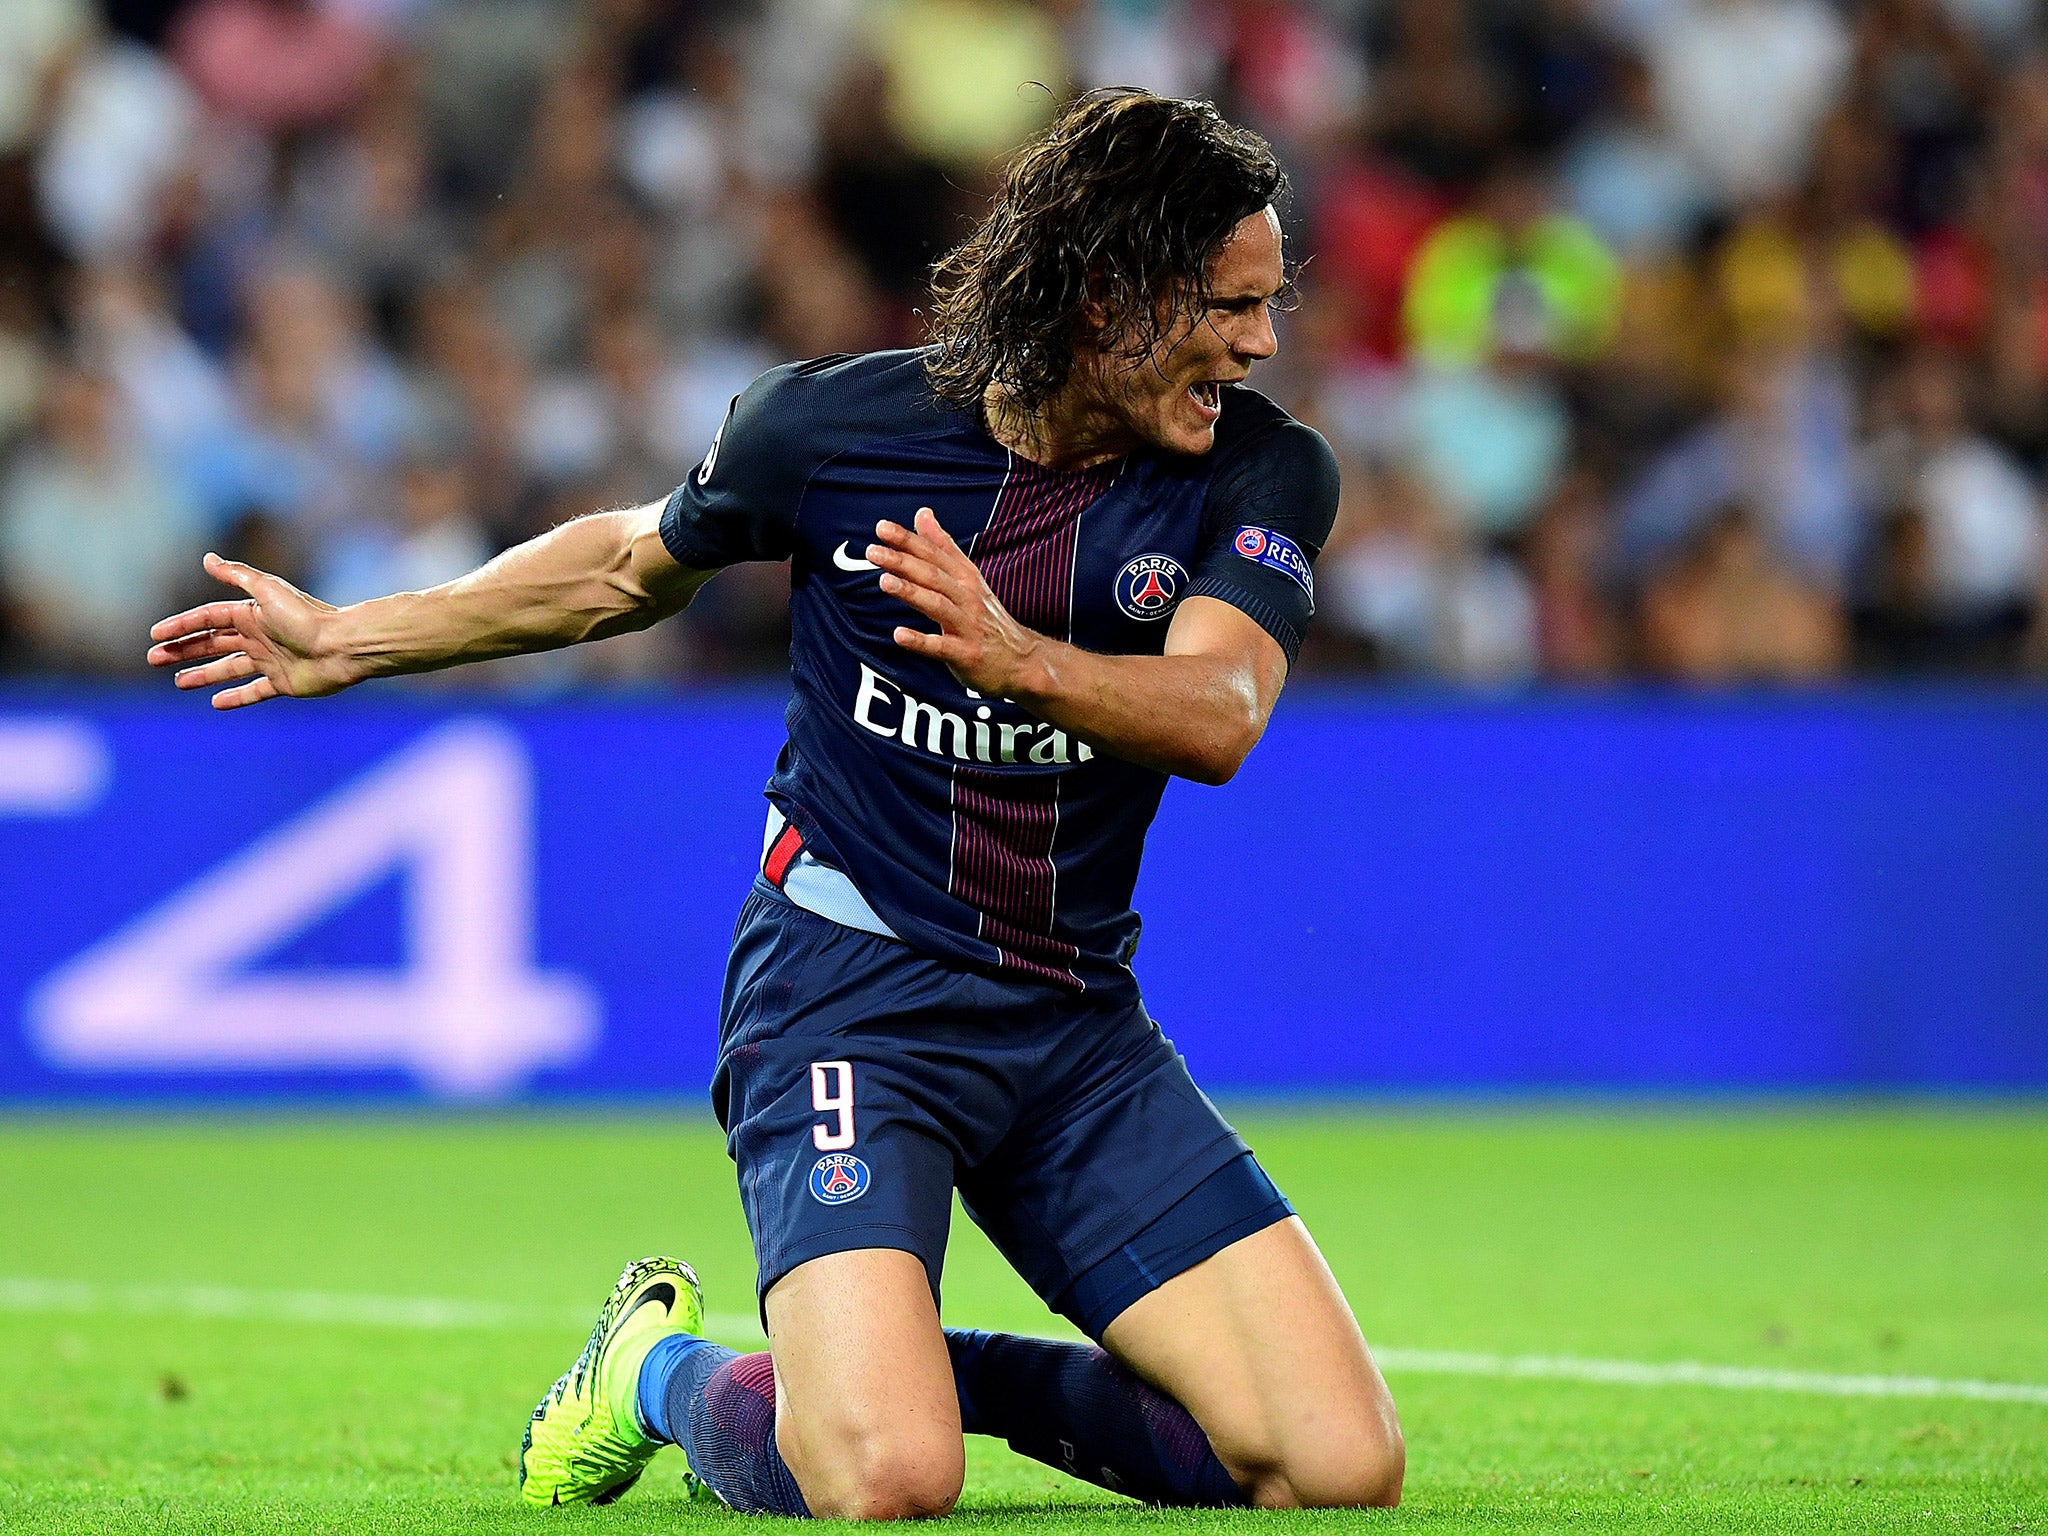 Edinson Cavani missed a number of chances in PSG's 1-1 draw with Arsenal